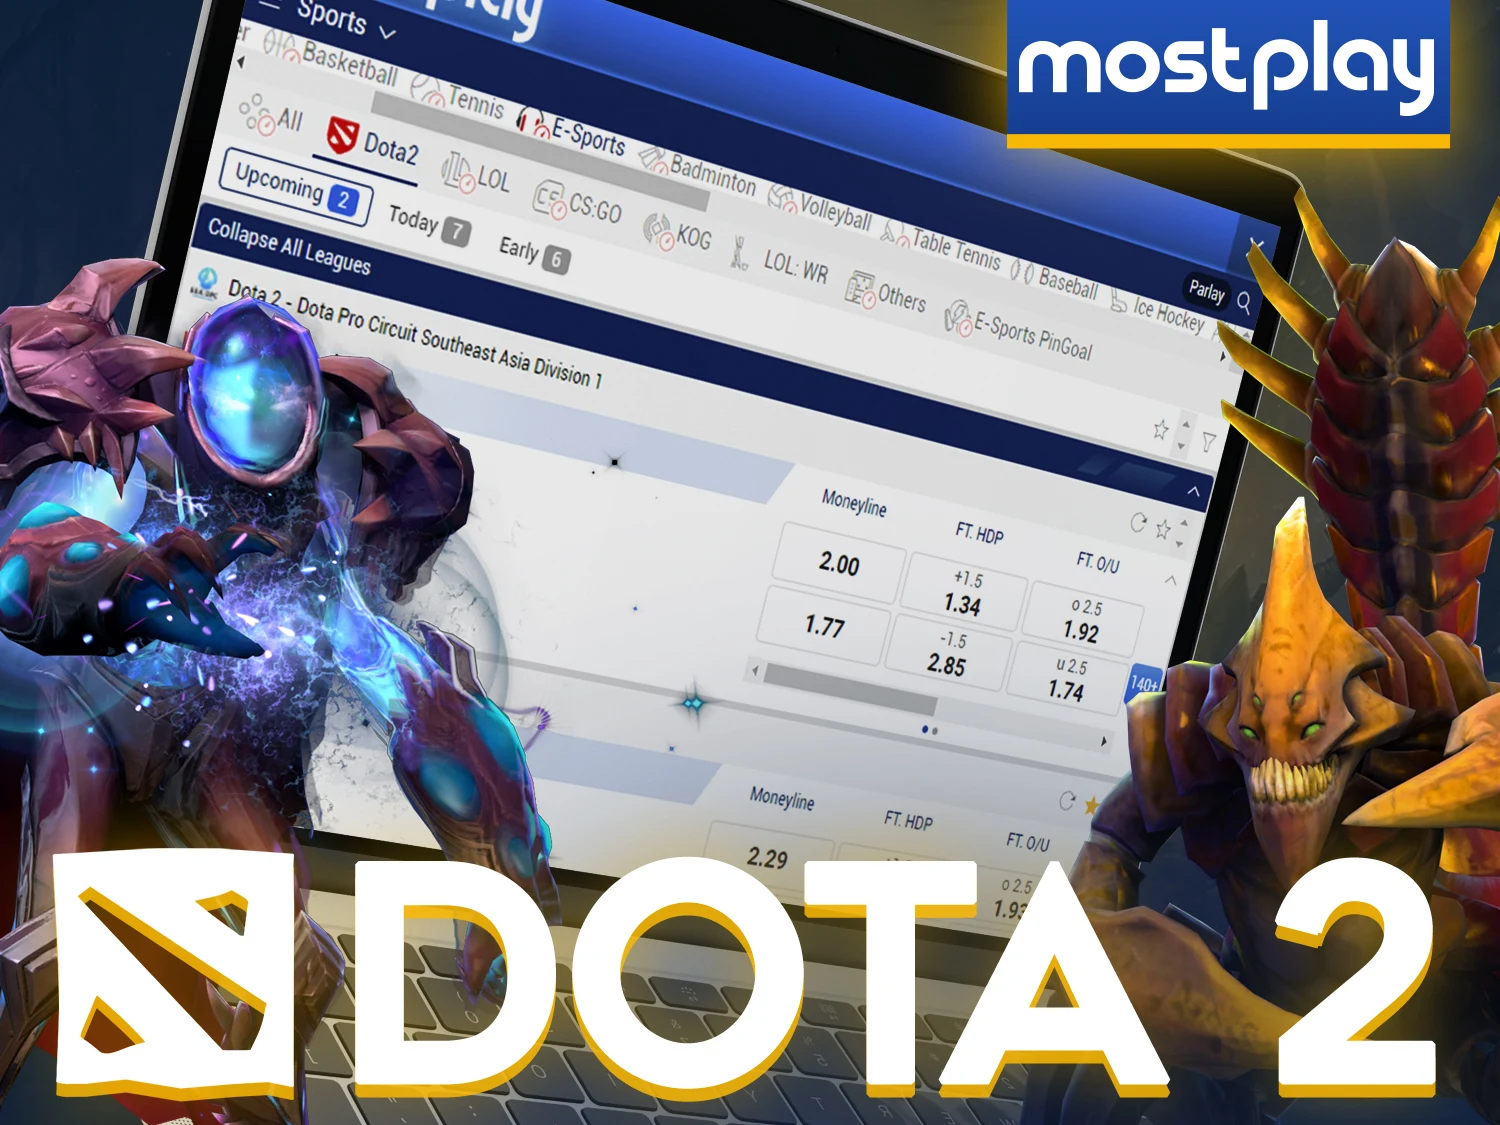 Bet on the matches of the biggest Dota 2 tournaments at Mostplay.